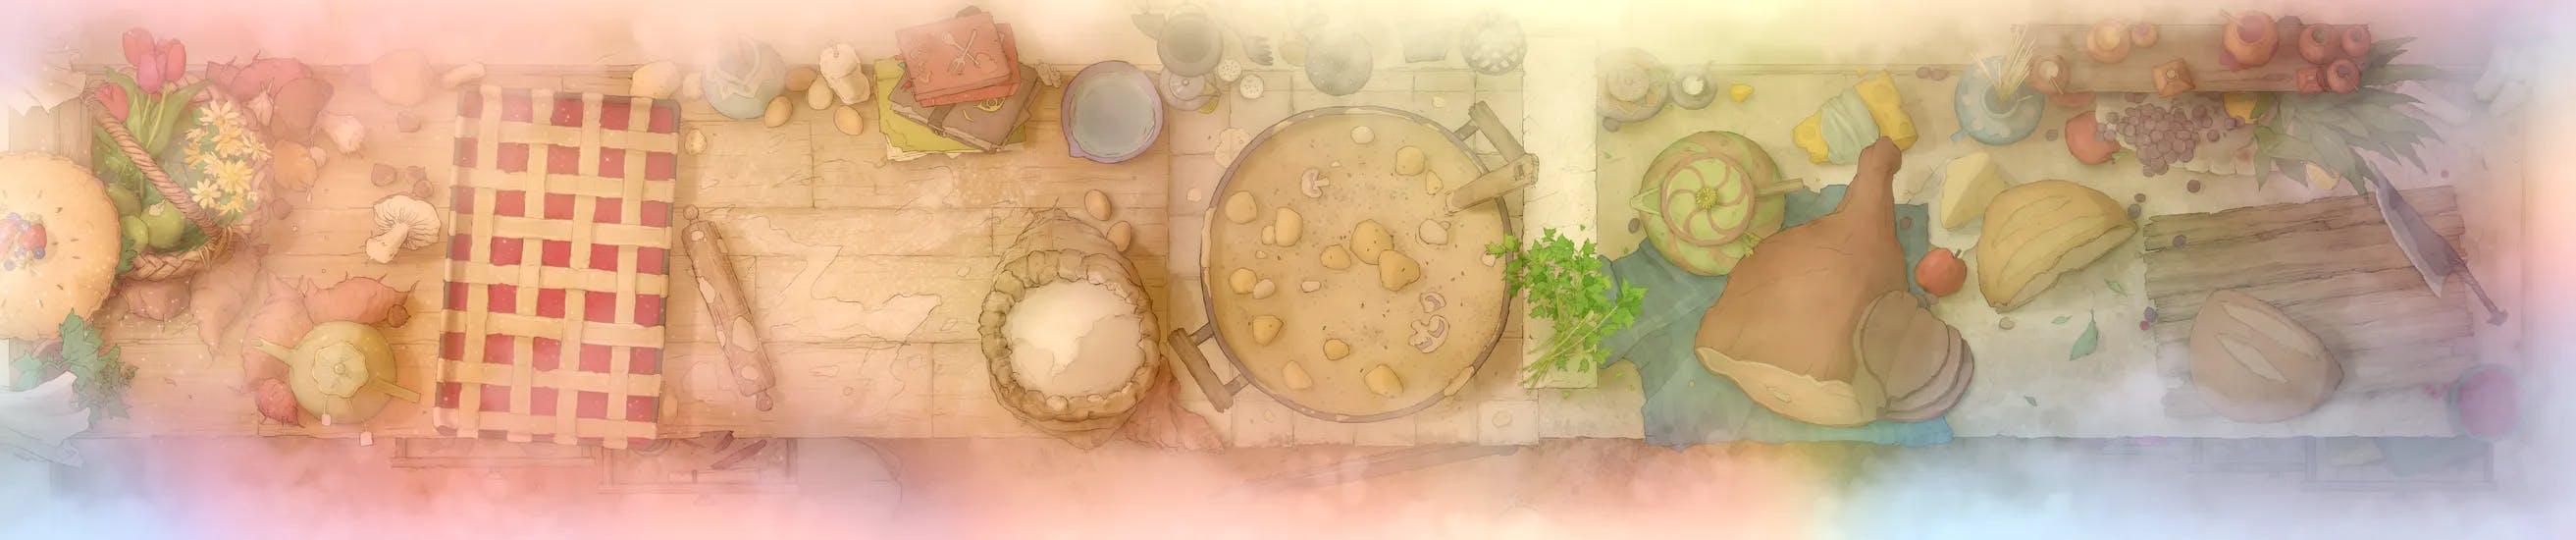 Giant Kitchen map, Dream Sequence variant thumbnail